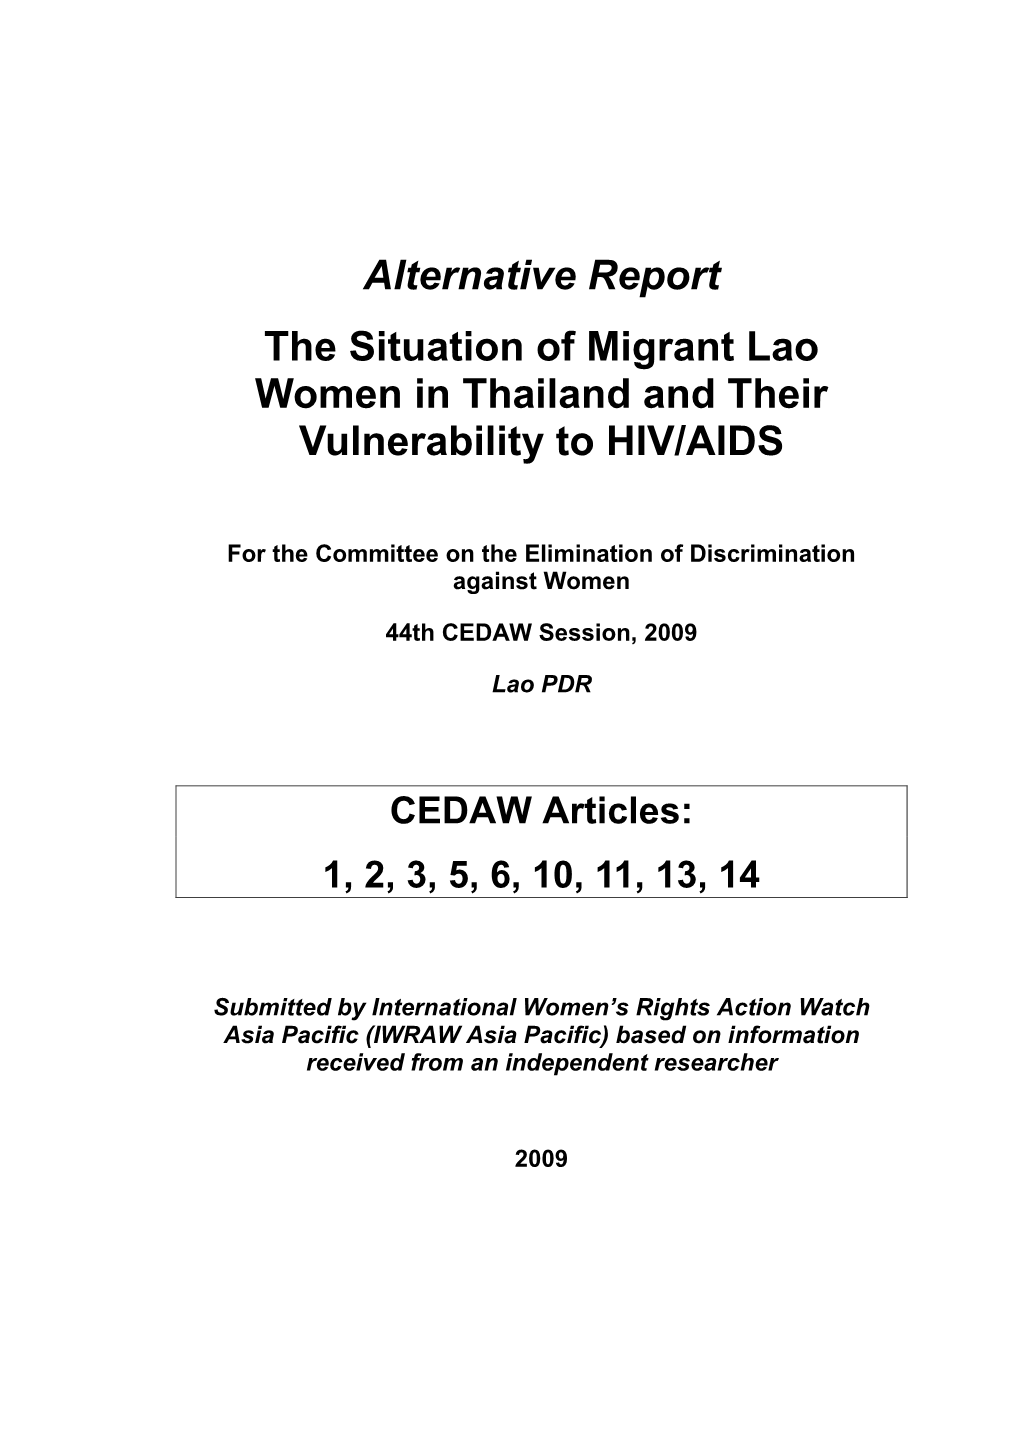 HIV/AIDS Problem of Migrants from Burma in Thailand